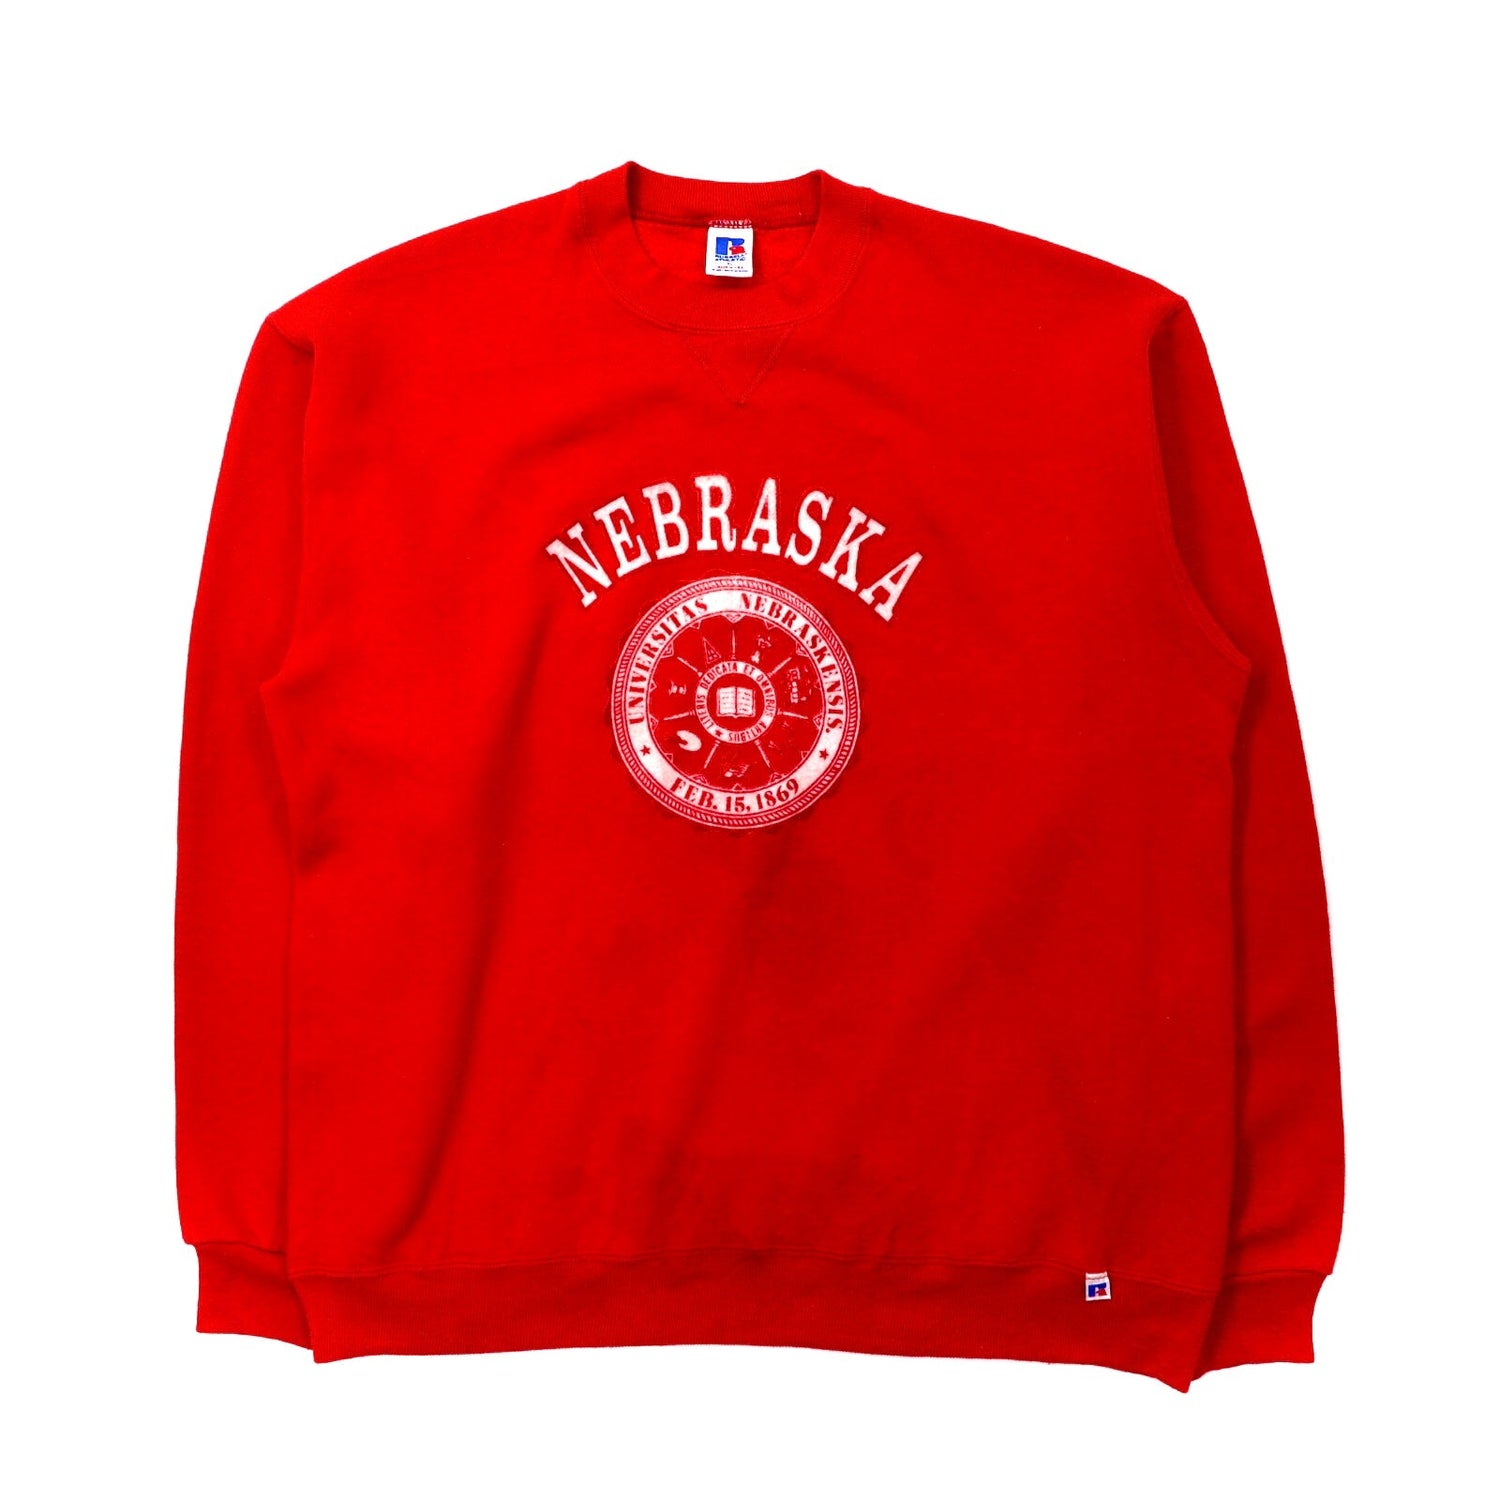 Russell Athletic Crewneck Sweatshirt XL Red Cotton brushed lining College  Printed Big Size USA